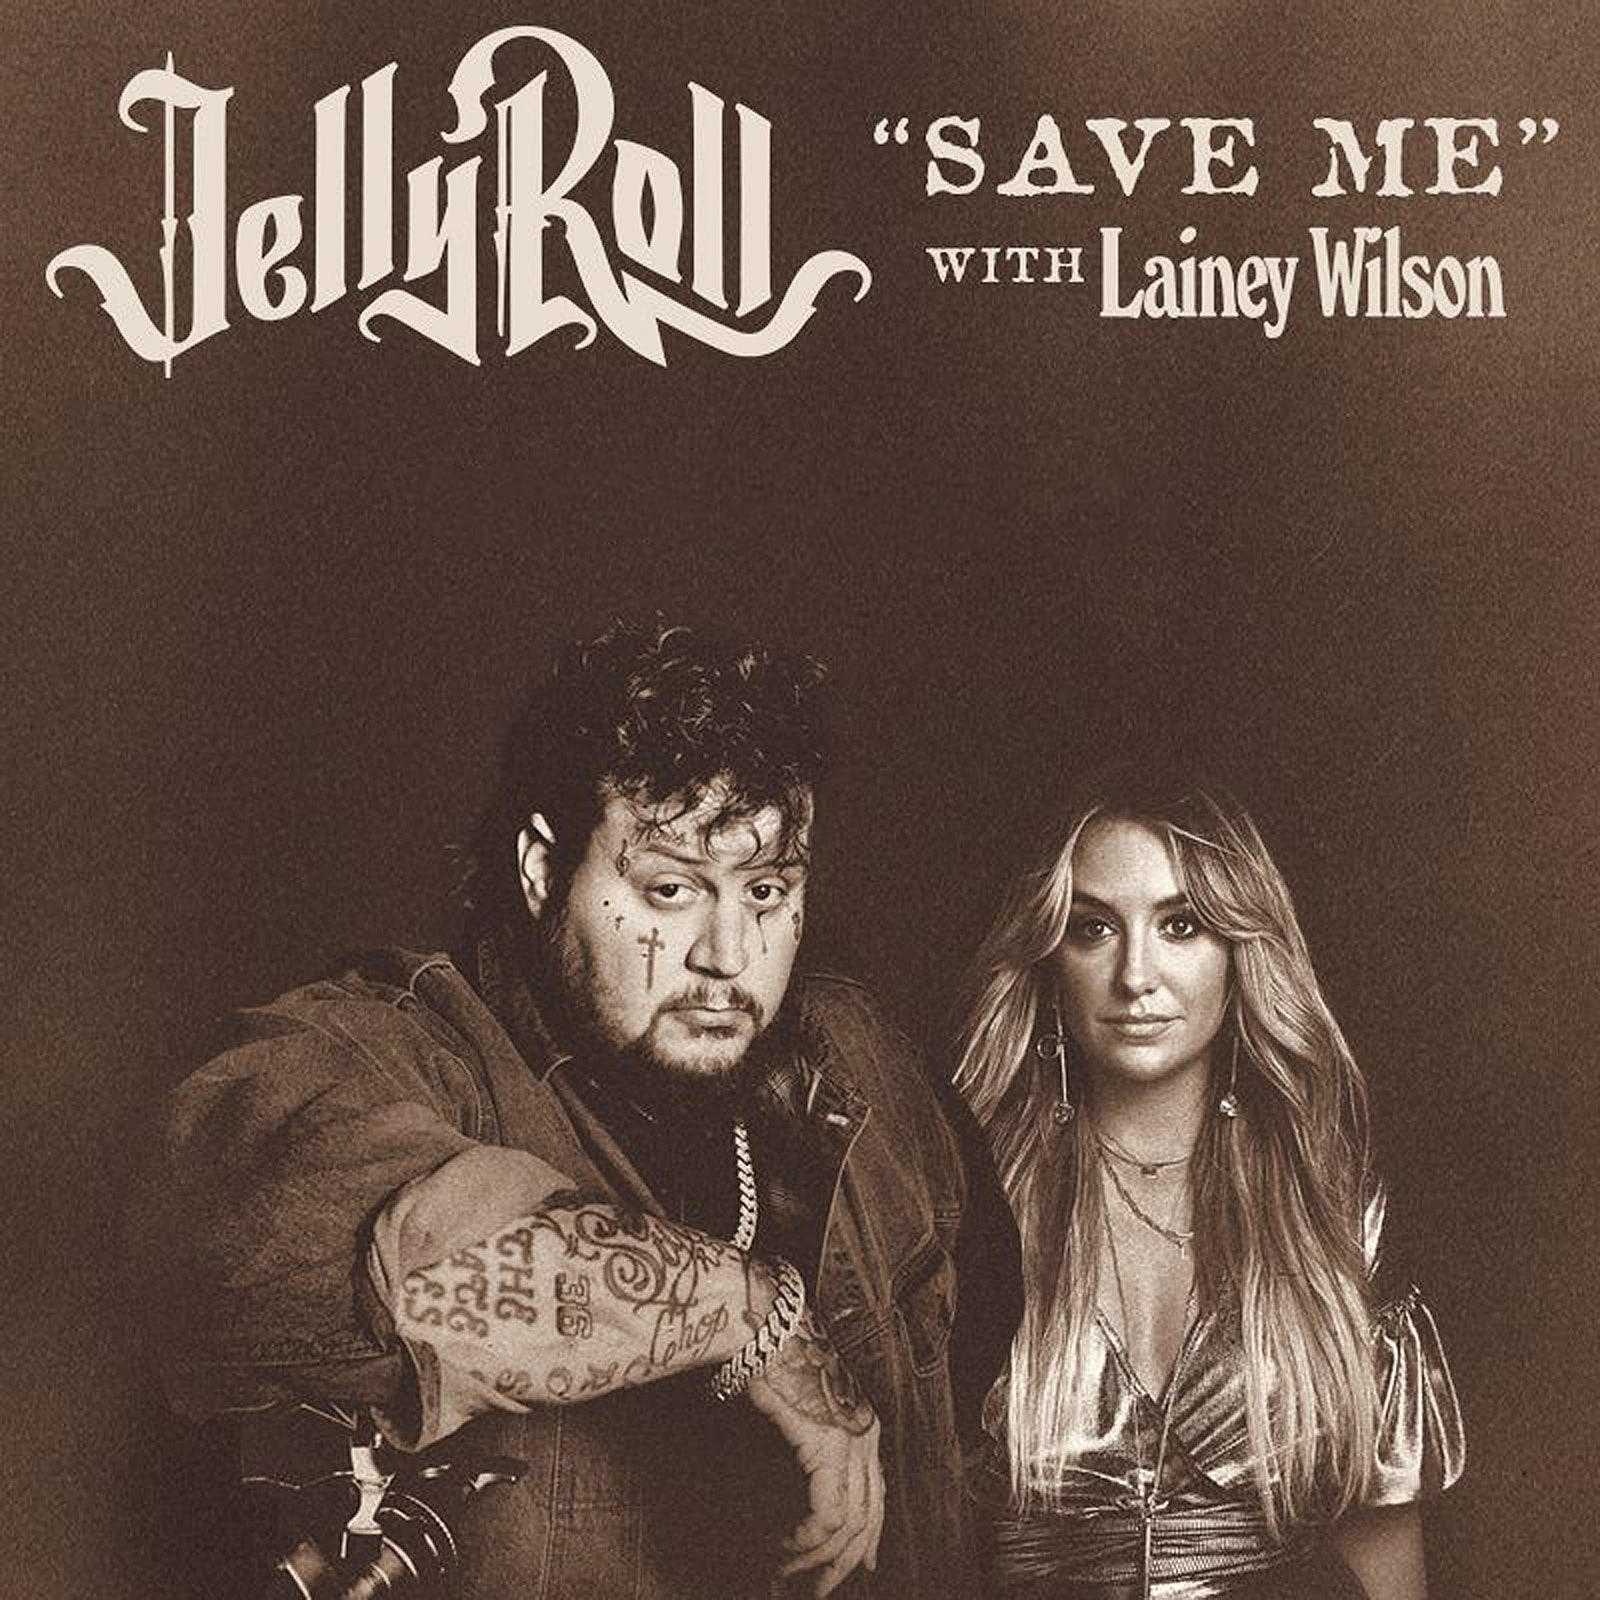 Jelly Roll & Lainey Wilson Save Me cover artwork